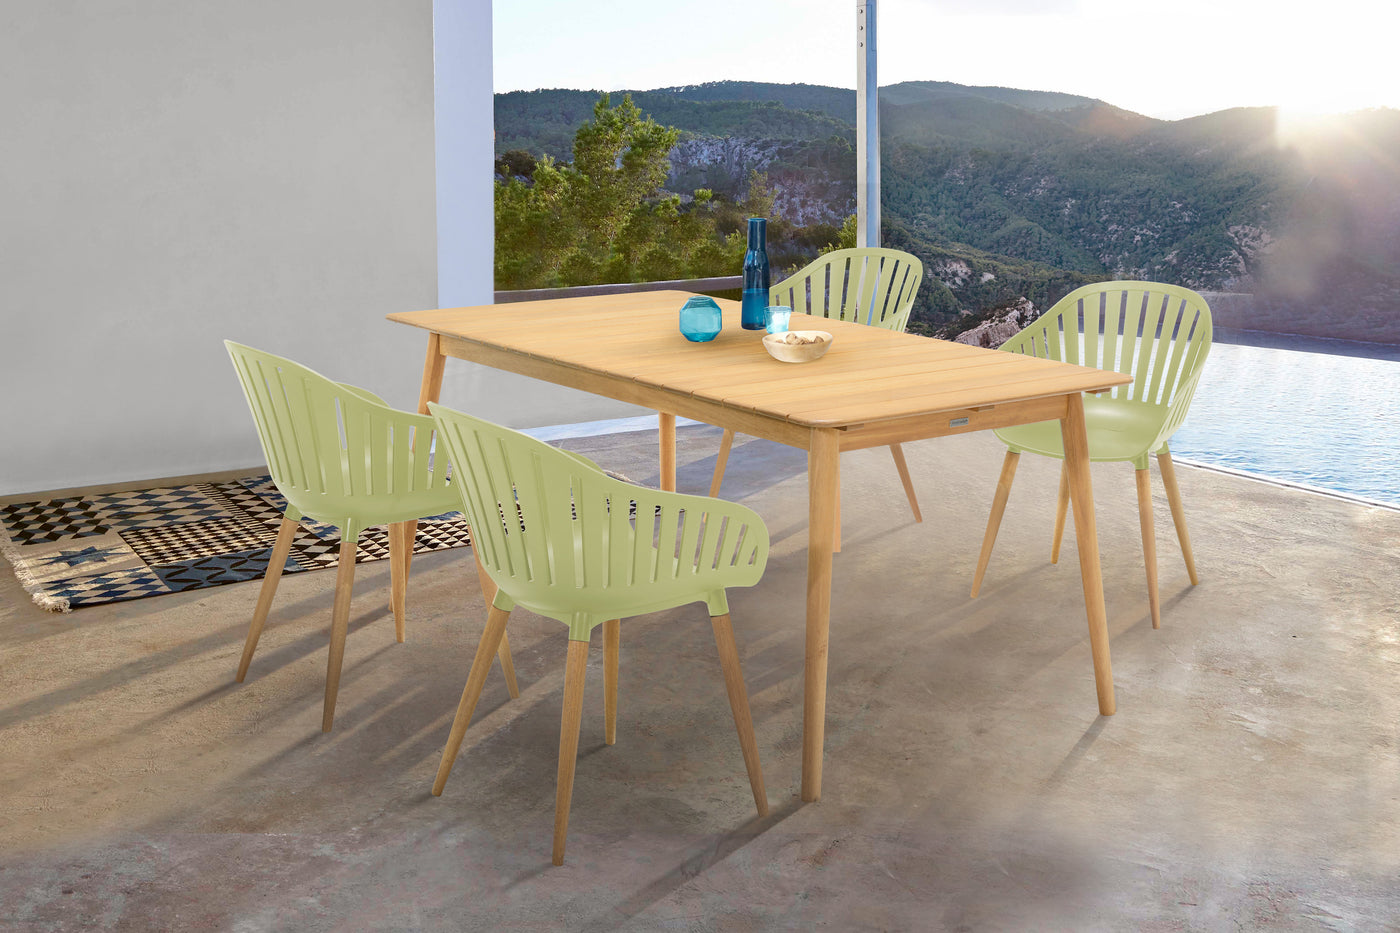 Nassau Outdoor Dining Table